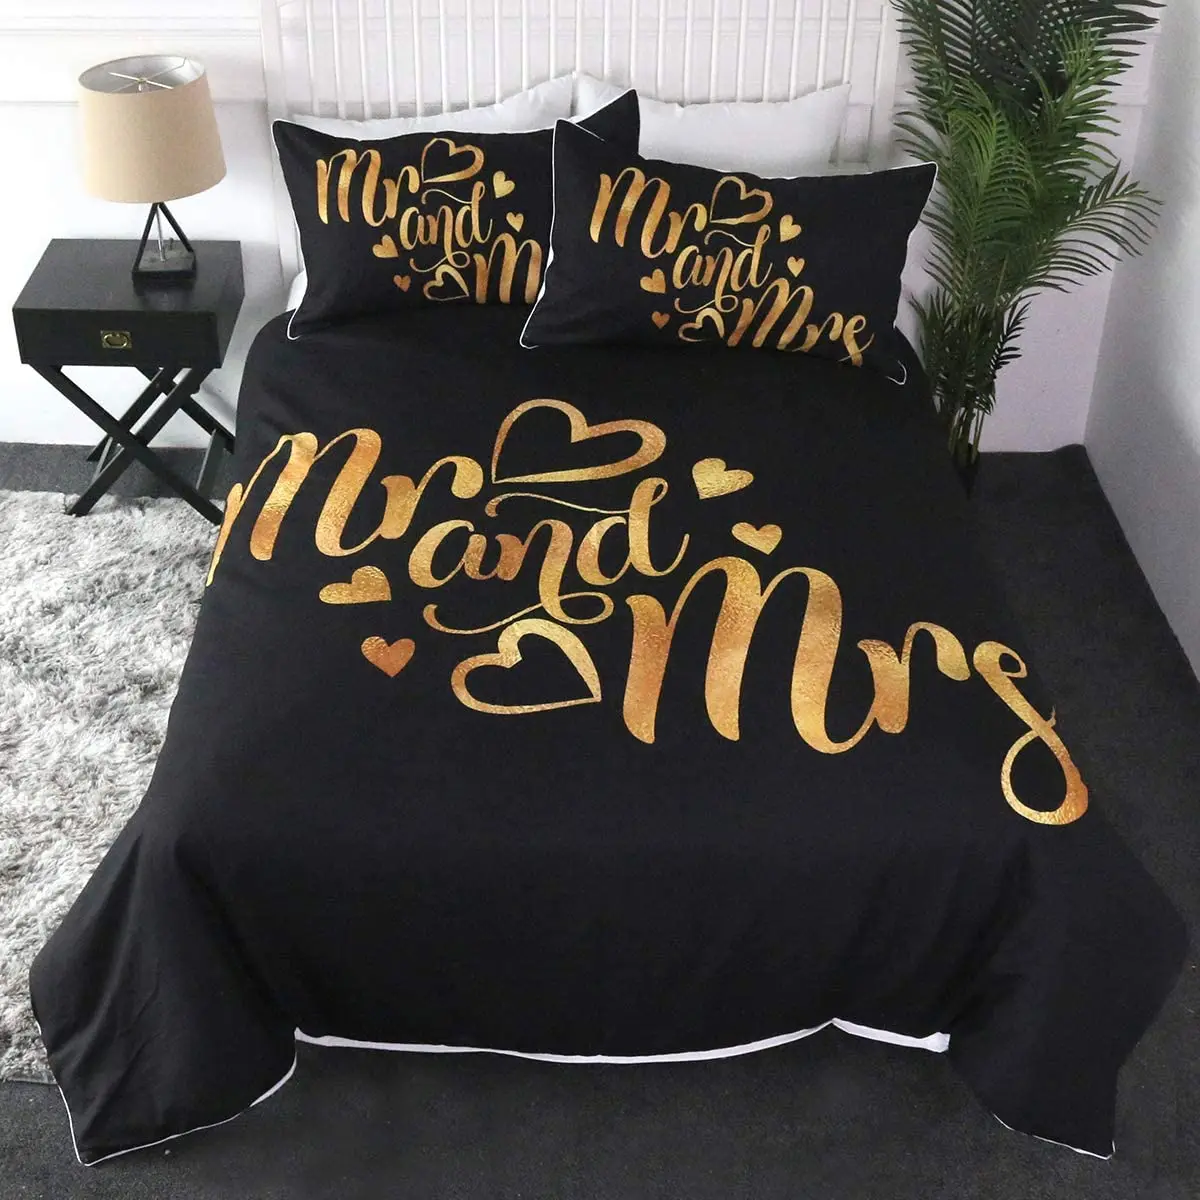 

Mr and Mrs Bedding Set Comforter Cover for Couples Black Love and Gold Duvet Cover Cute Bedspreads Romantic Valentines Gift Sets